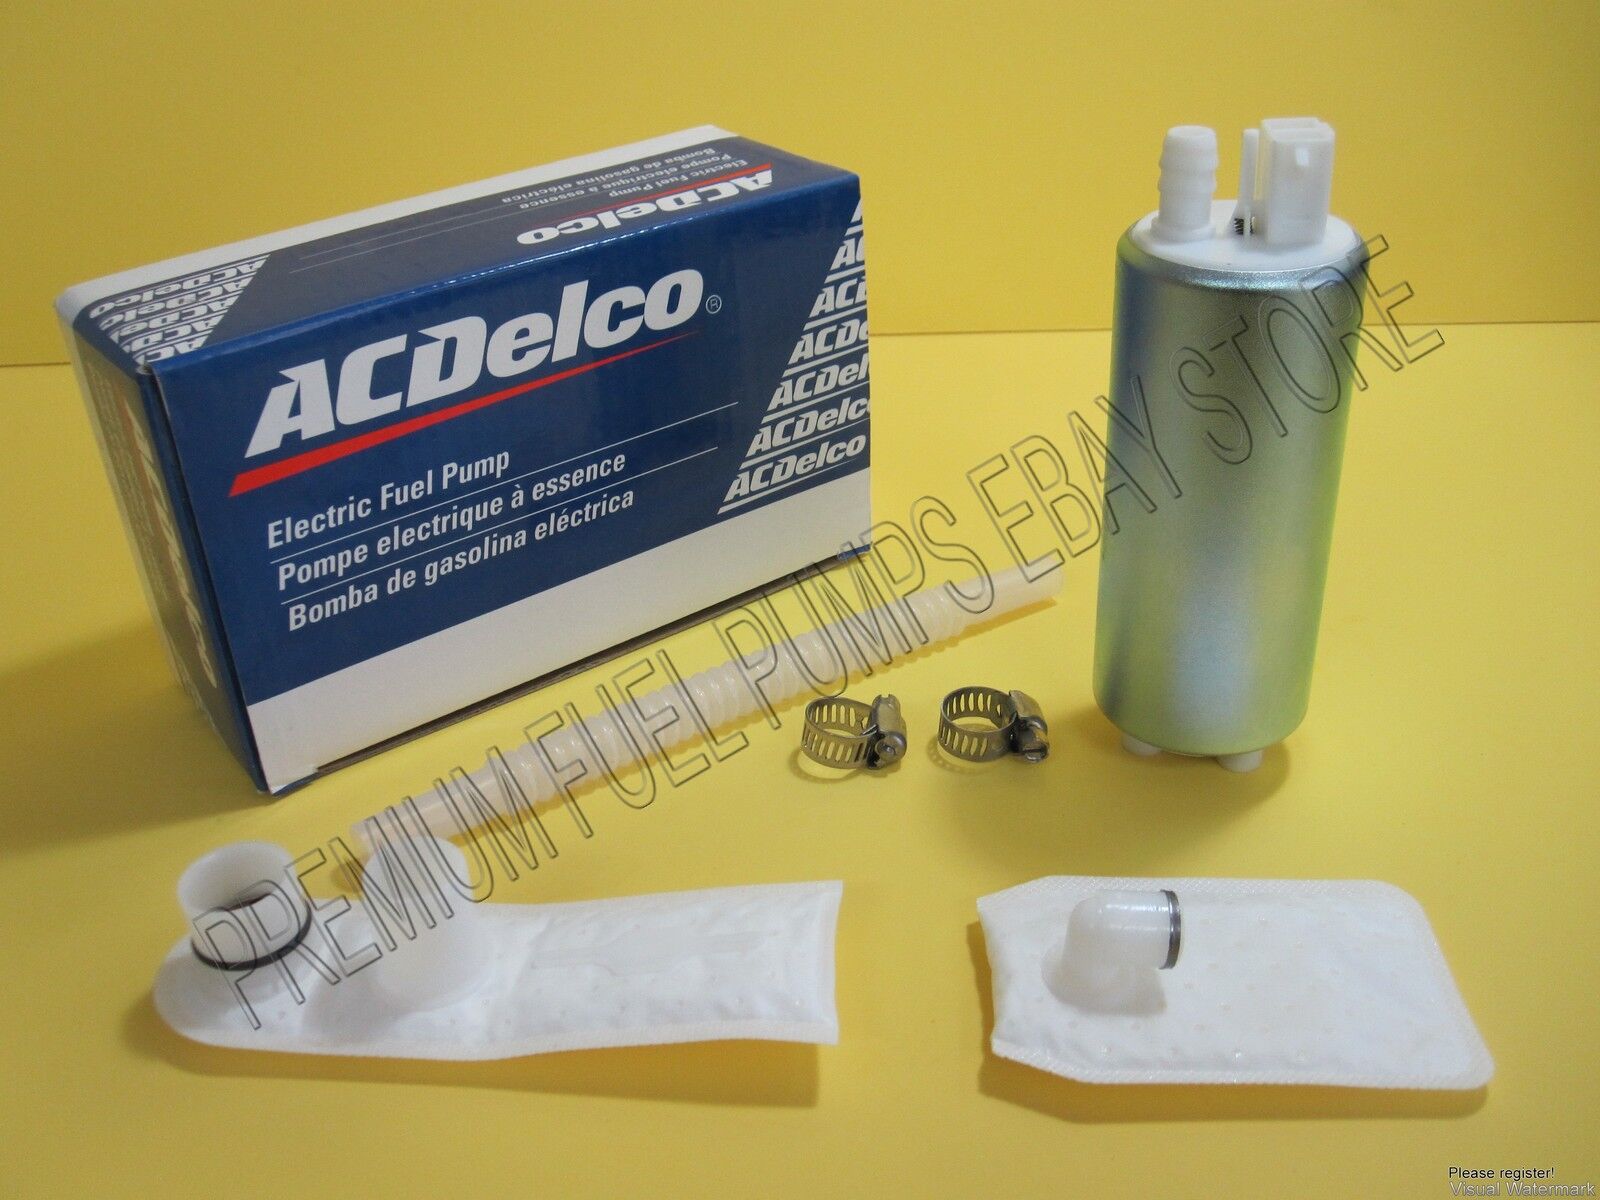 New OEM ACDelco Fuel Pump for CHEVROLET SUBURBAN 2000 - 2003 